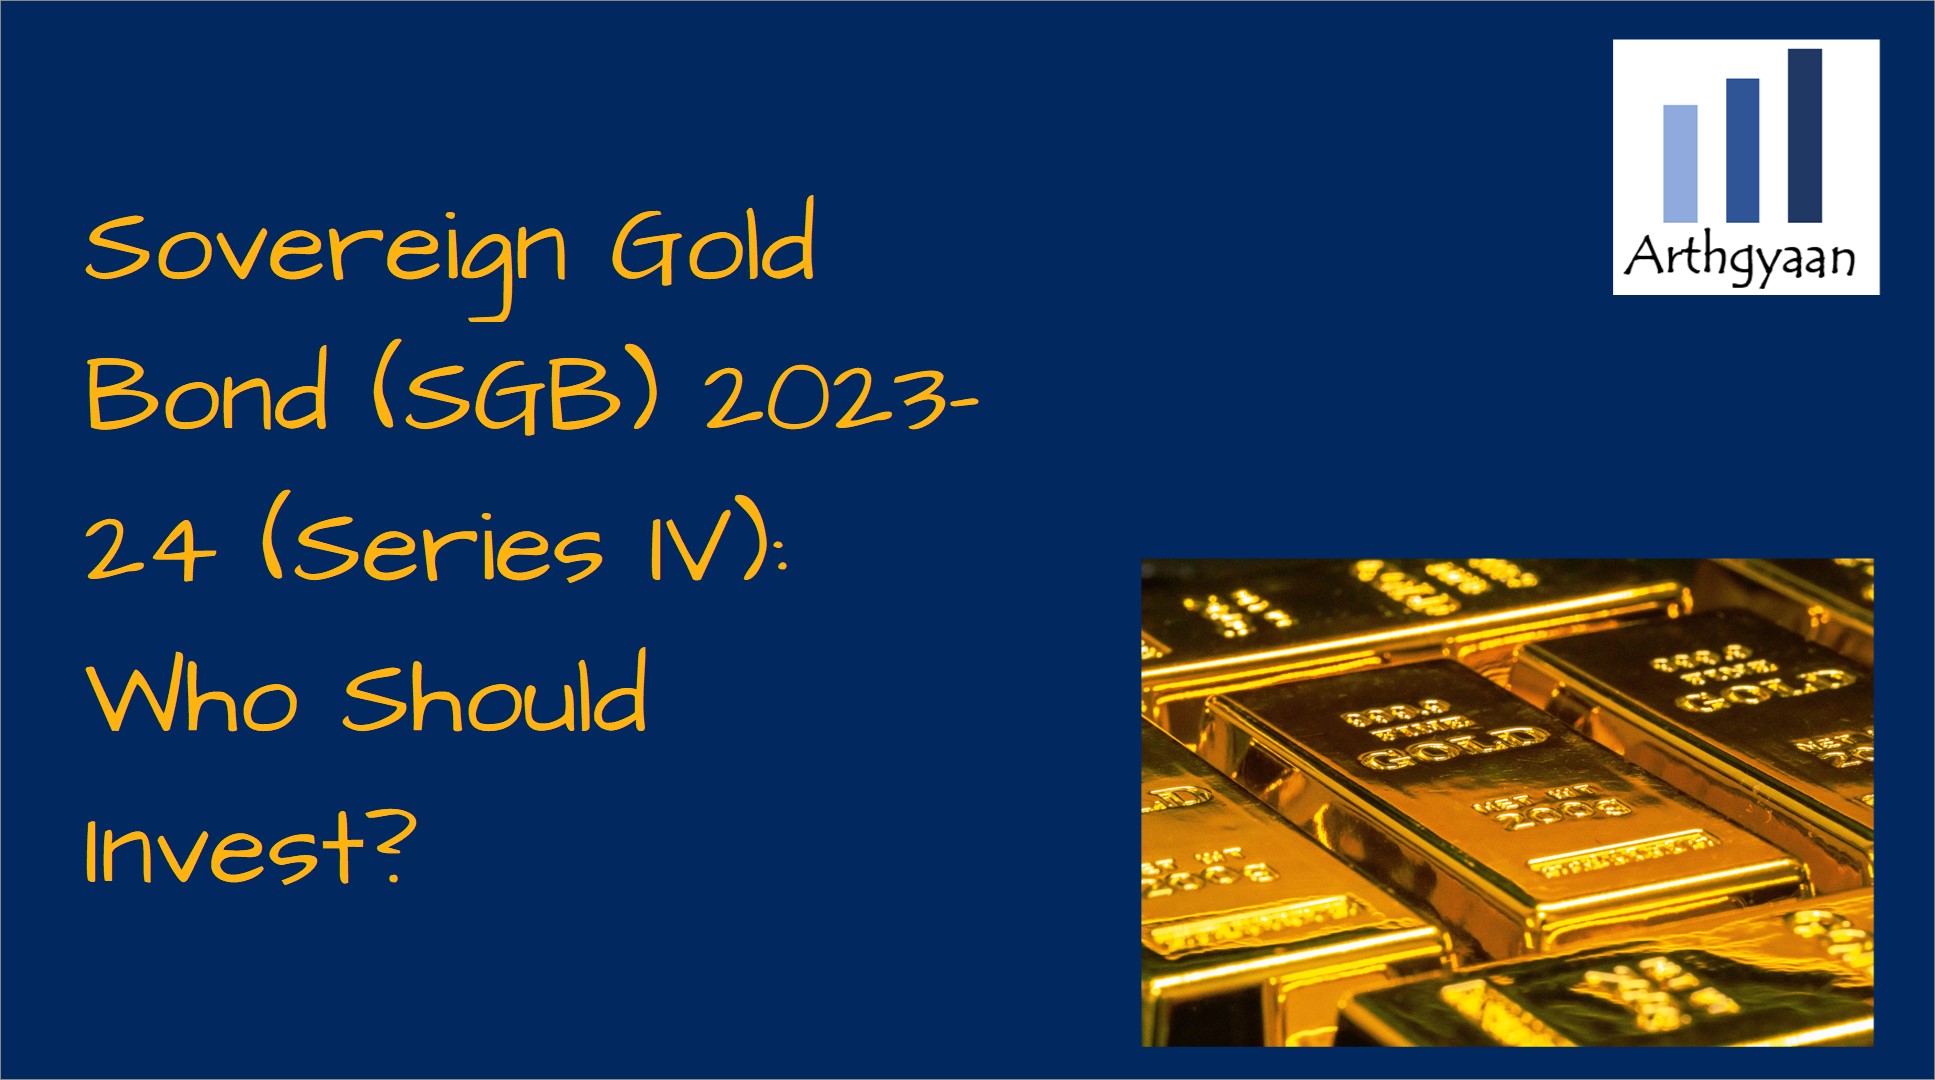 Sovereign Gold Bond (SGB) 2023-24 (Series IV) is priced at 6263: Who Should Invest?